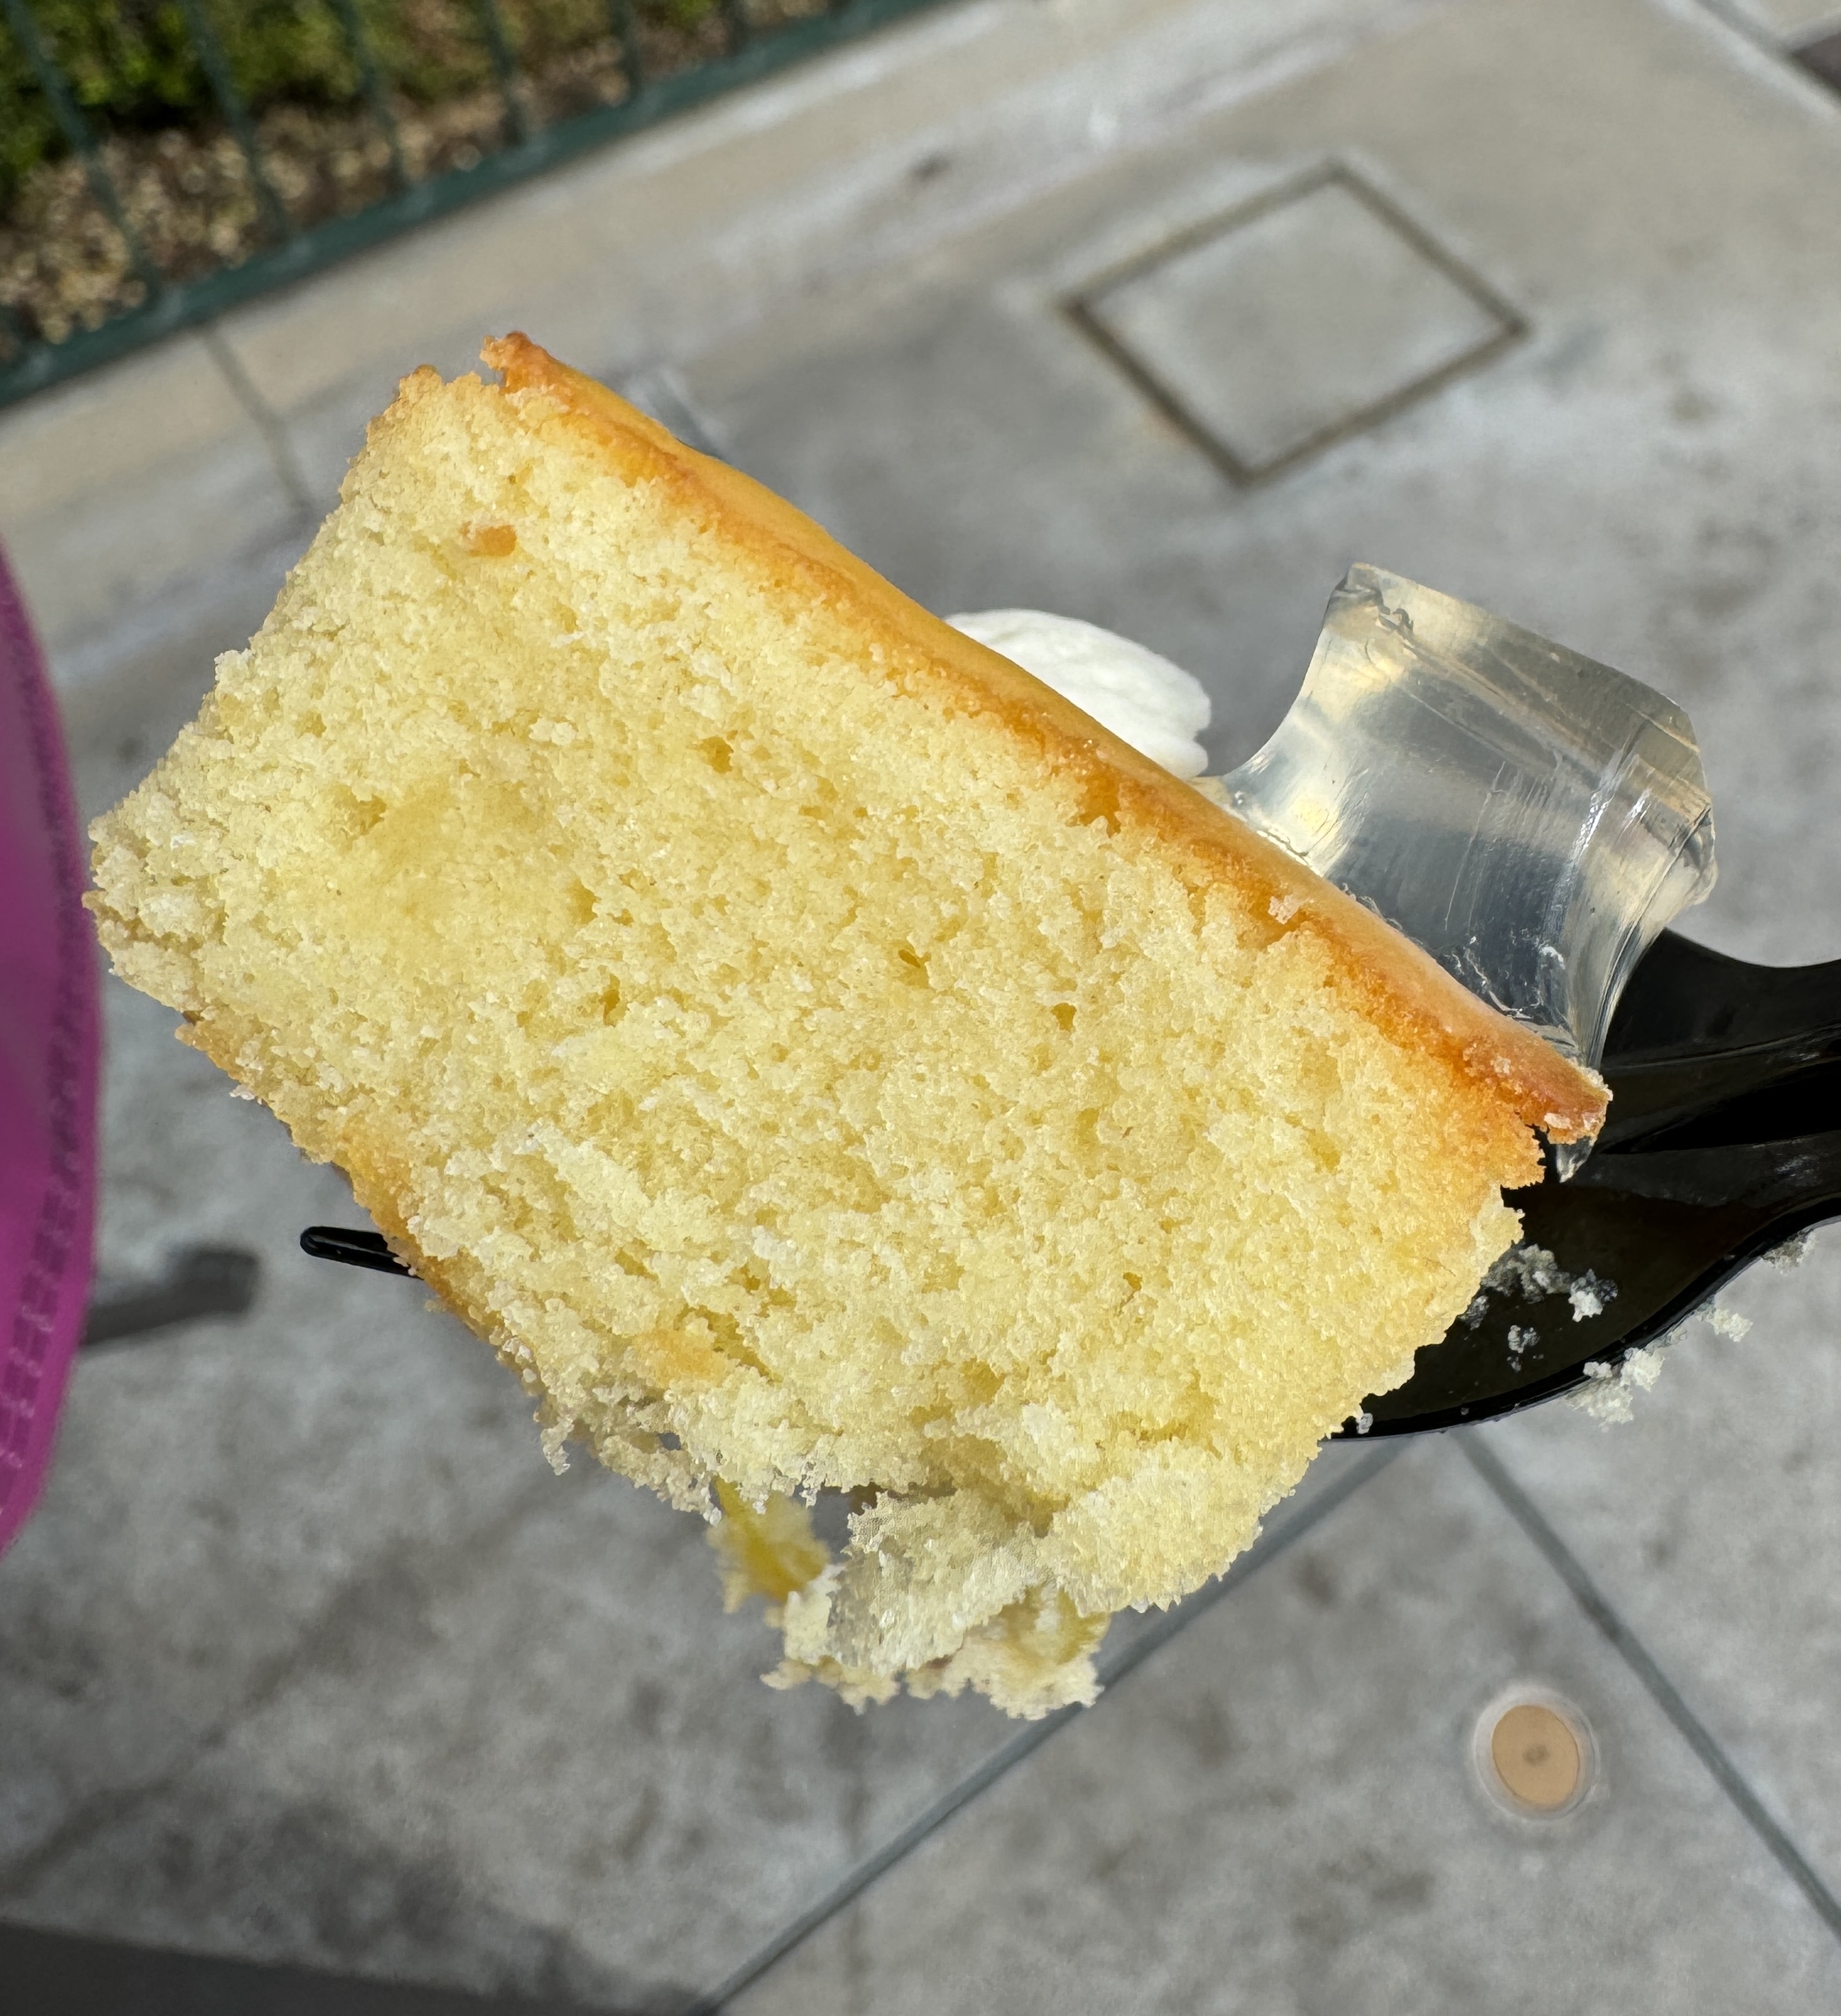 Close-up of a slice of cake on a fork, indicating a food experience while traveling